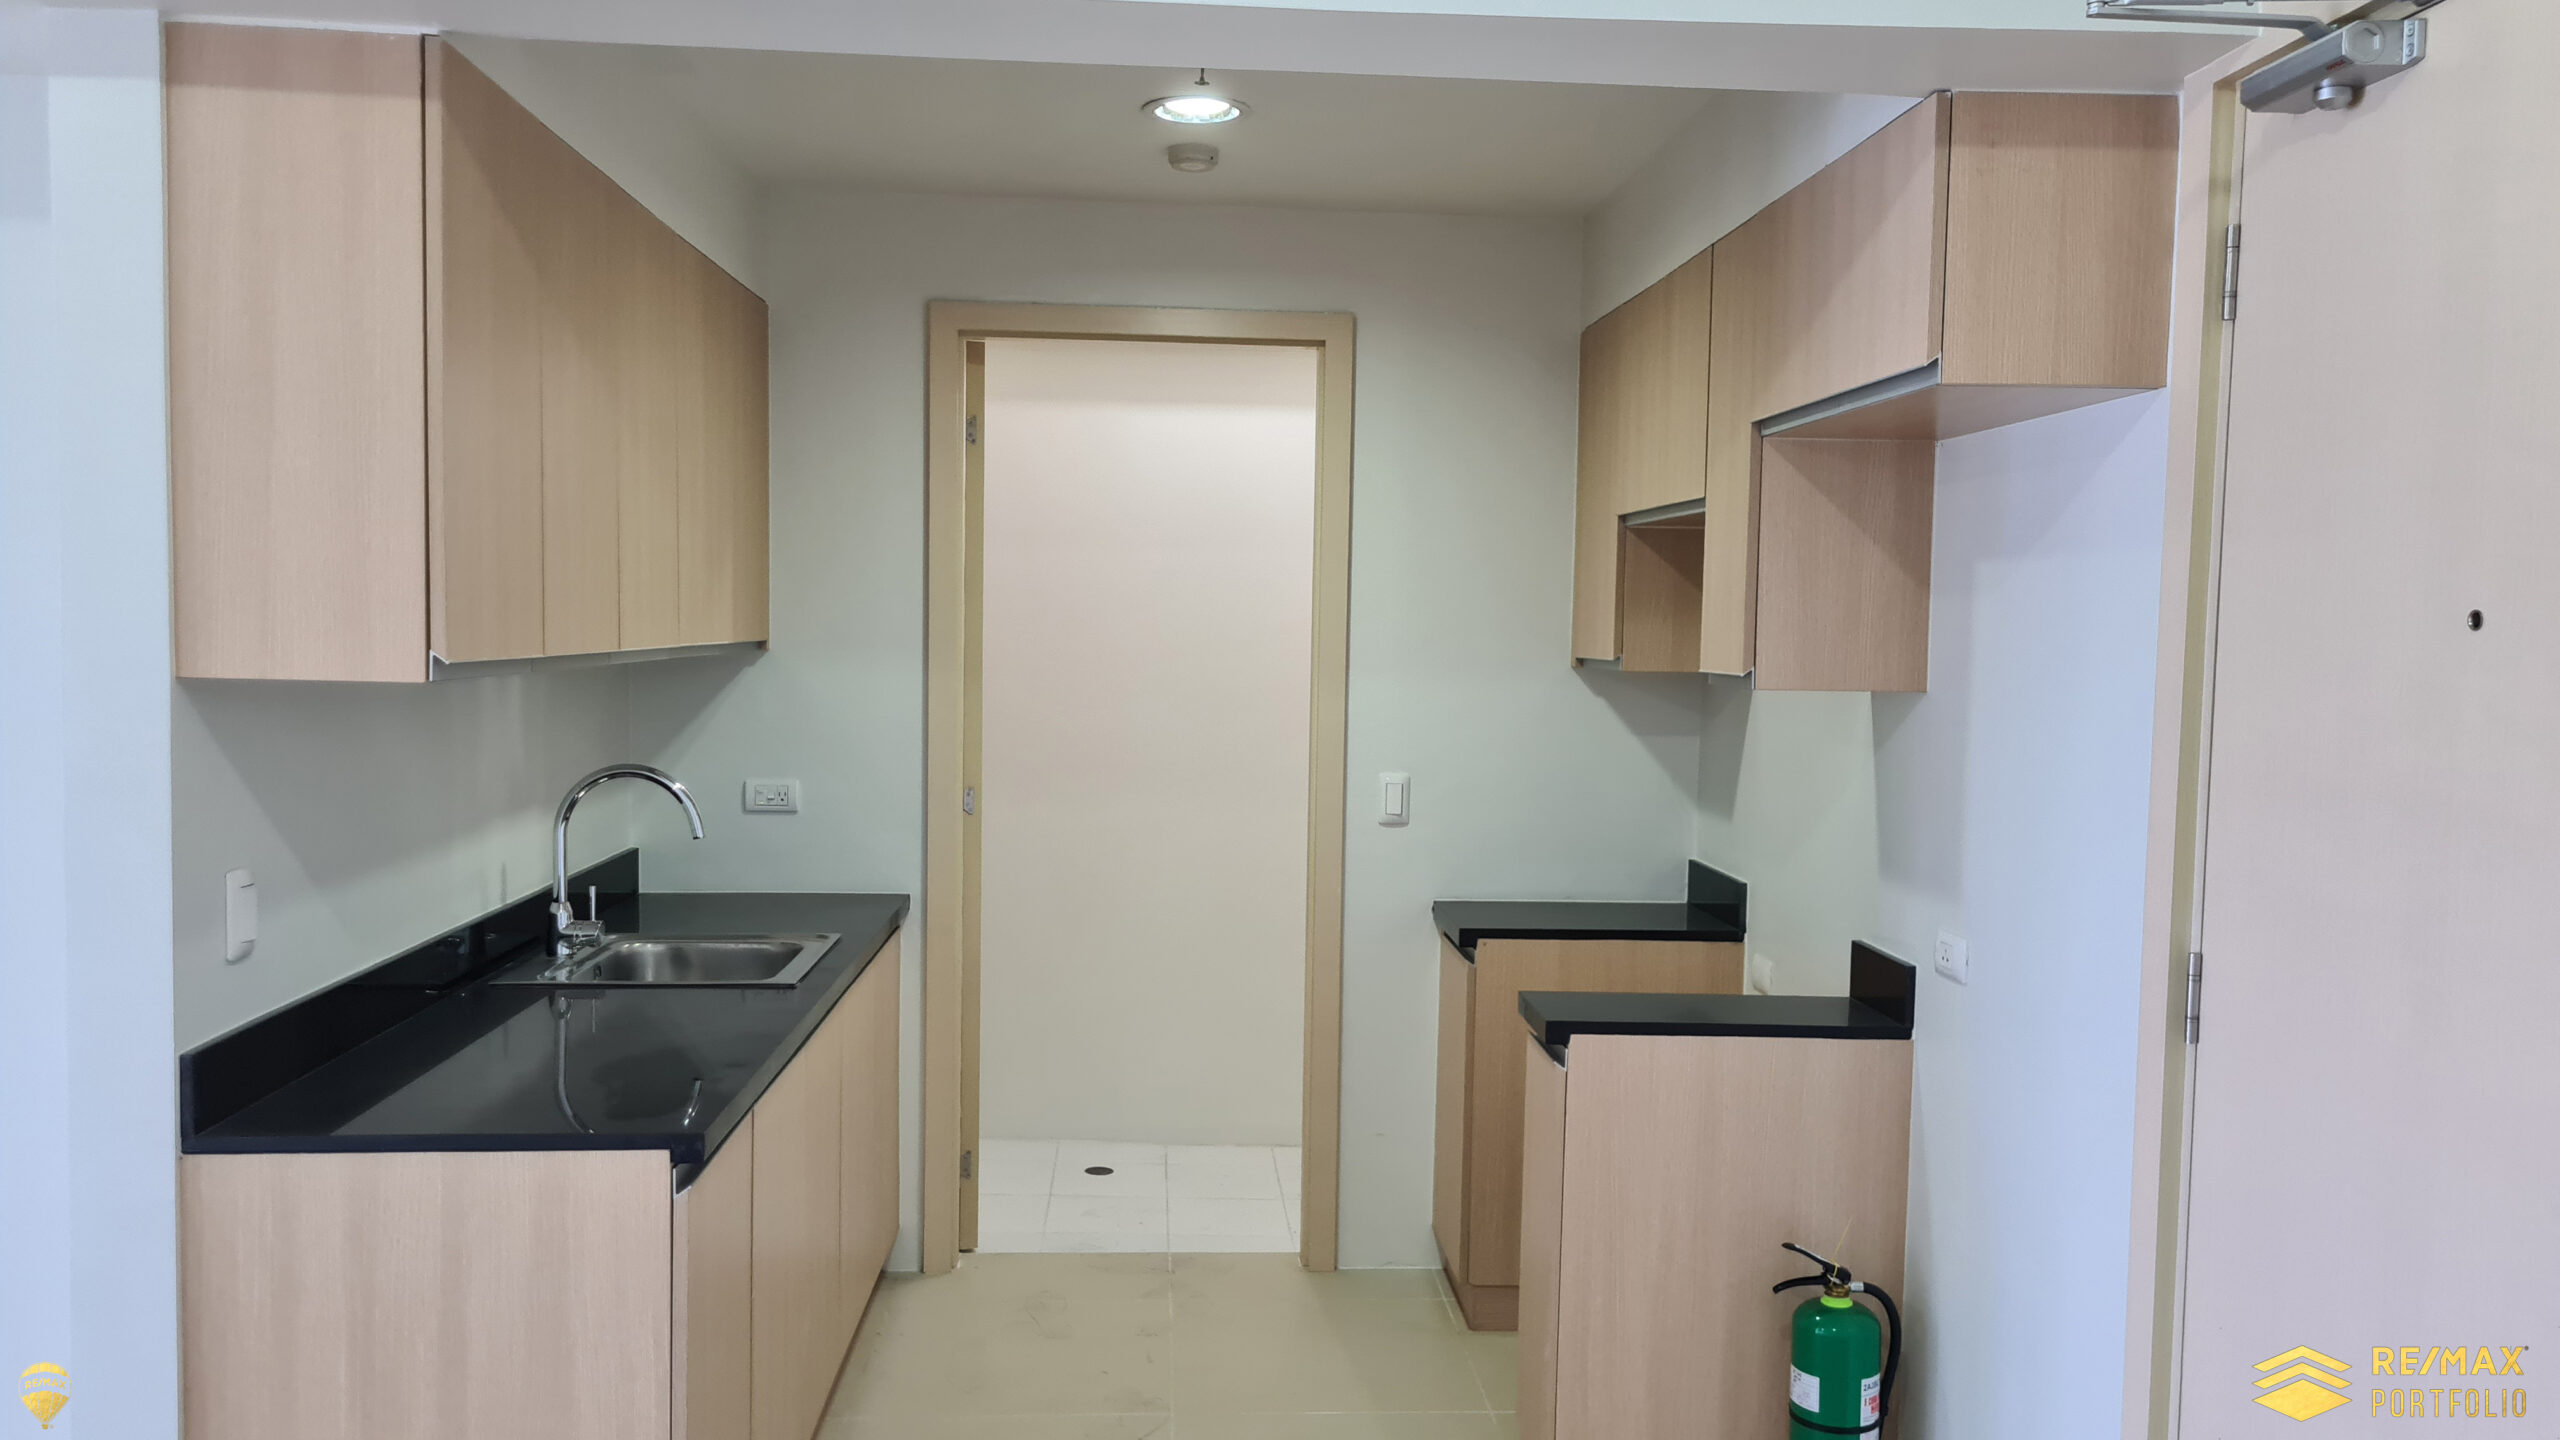 1BR Unit at The Sandstone Portico by Alveo, Pasig